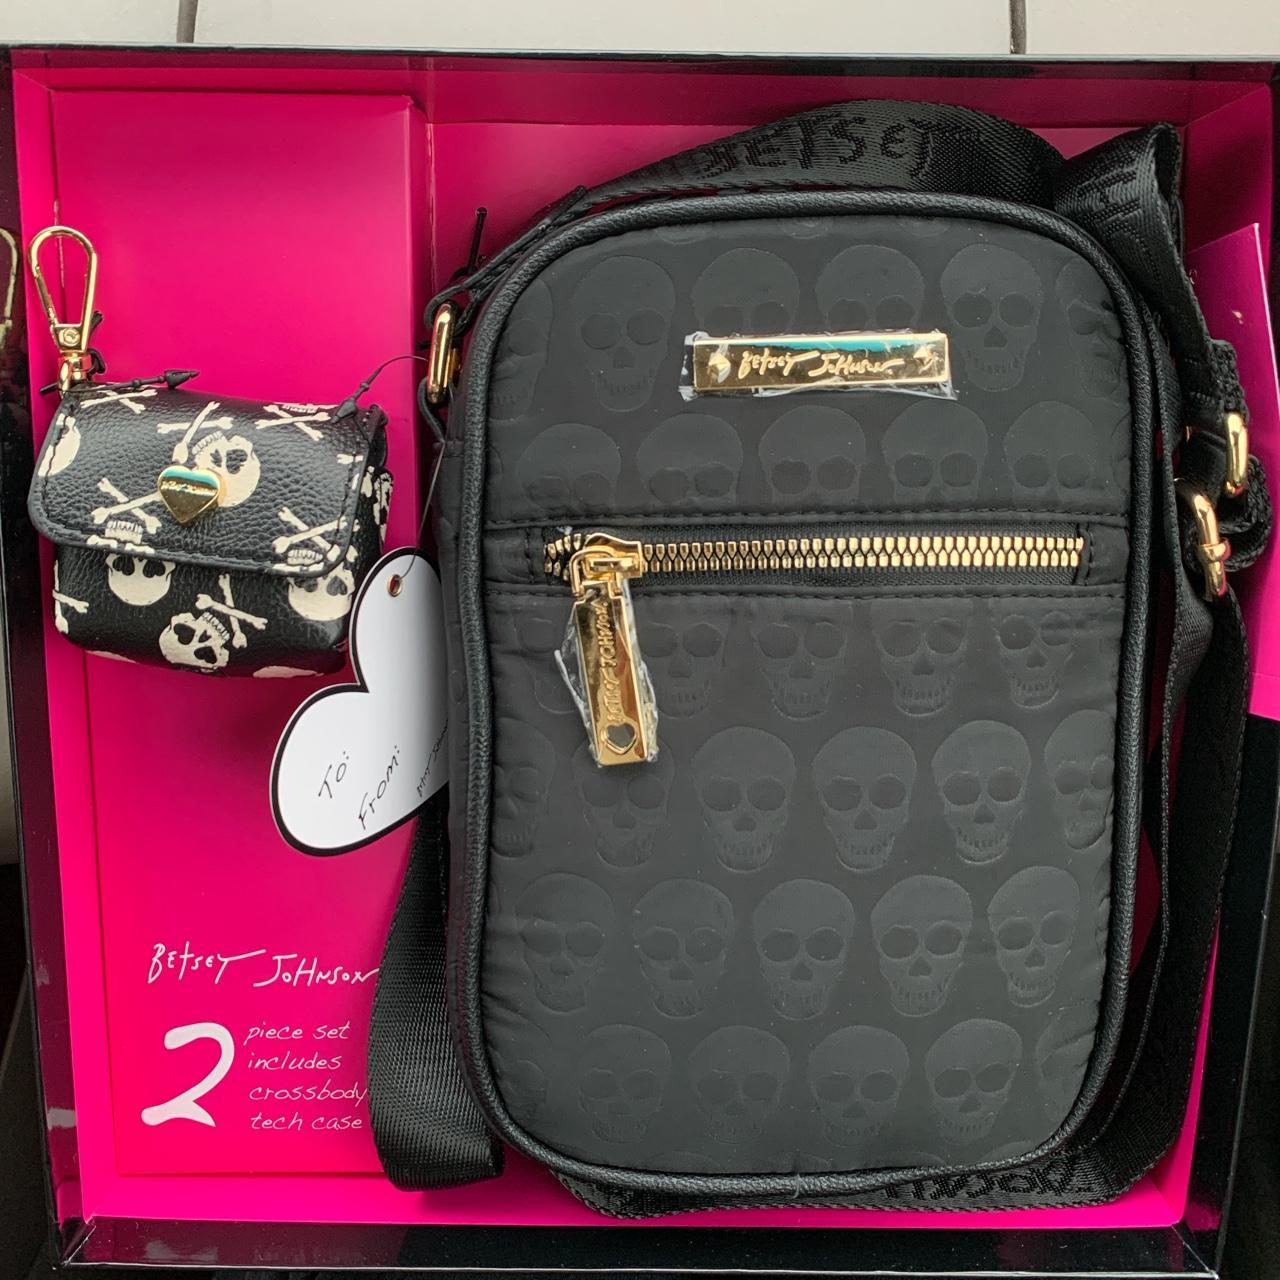 Betseyville Betsey Johnson purses - Bags & Luggage - Sioux City, Iowa |  Facebook Marketplace